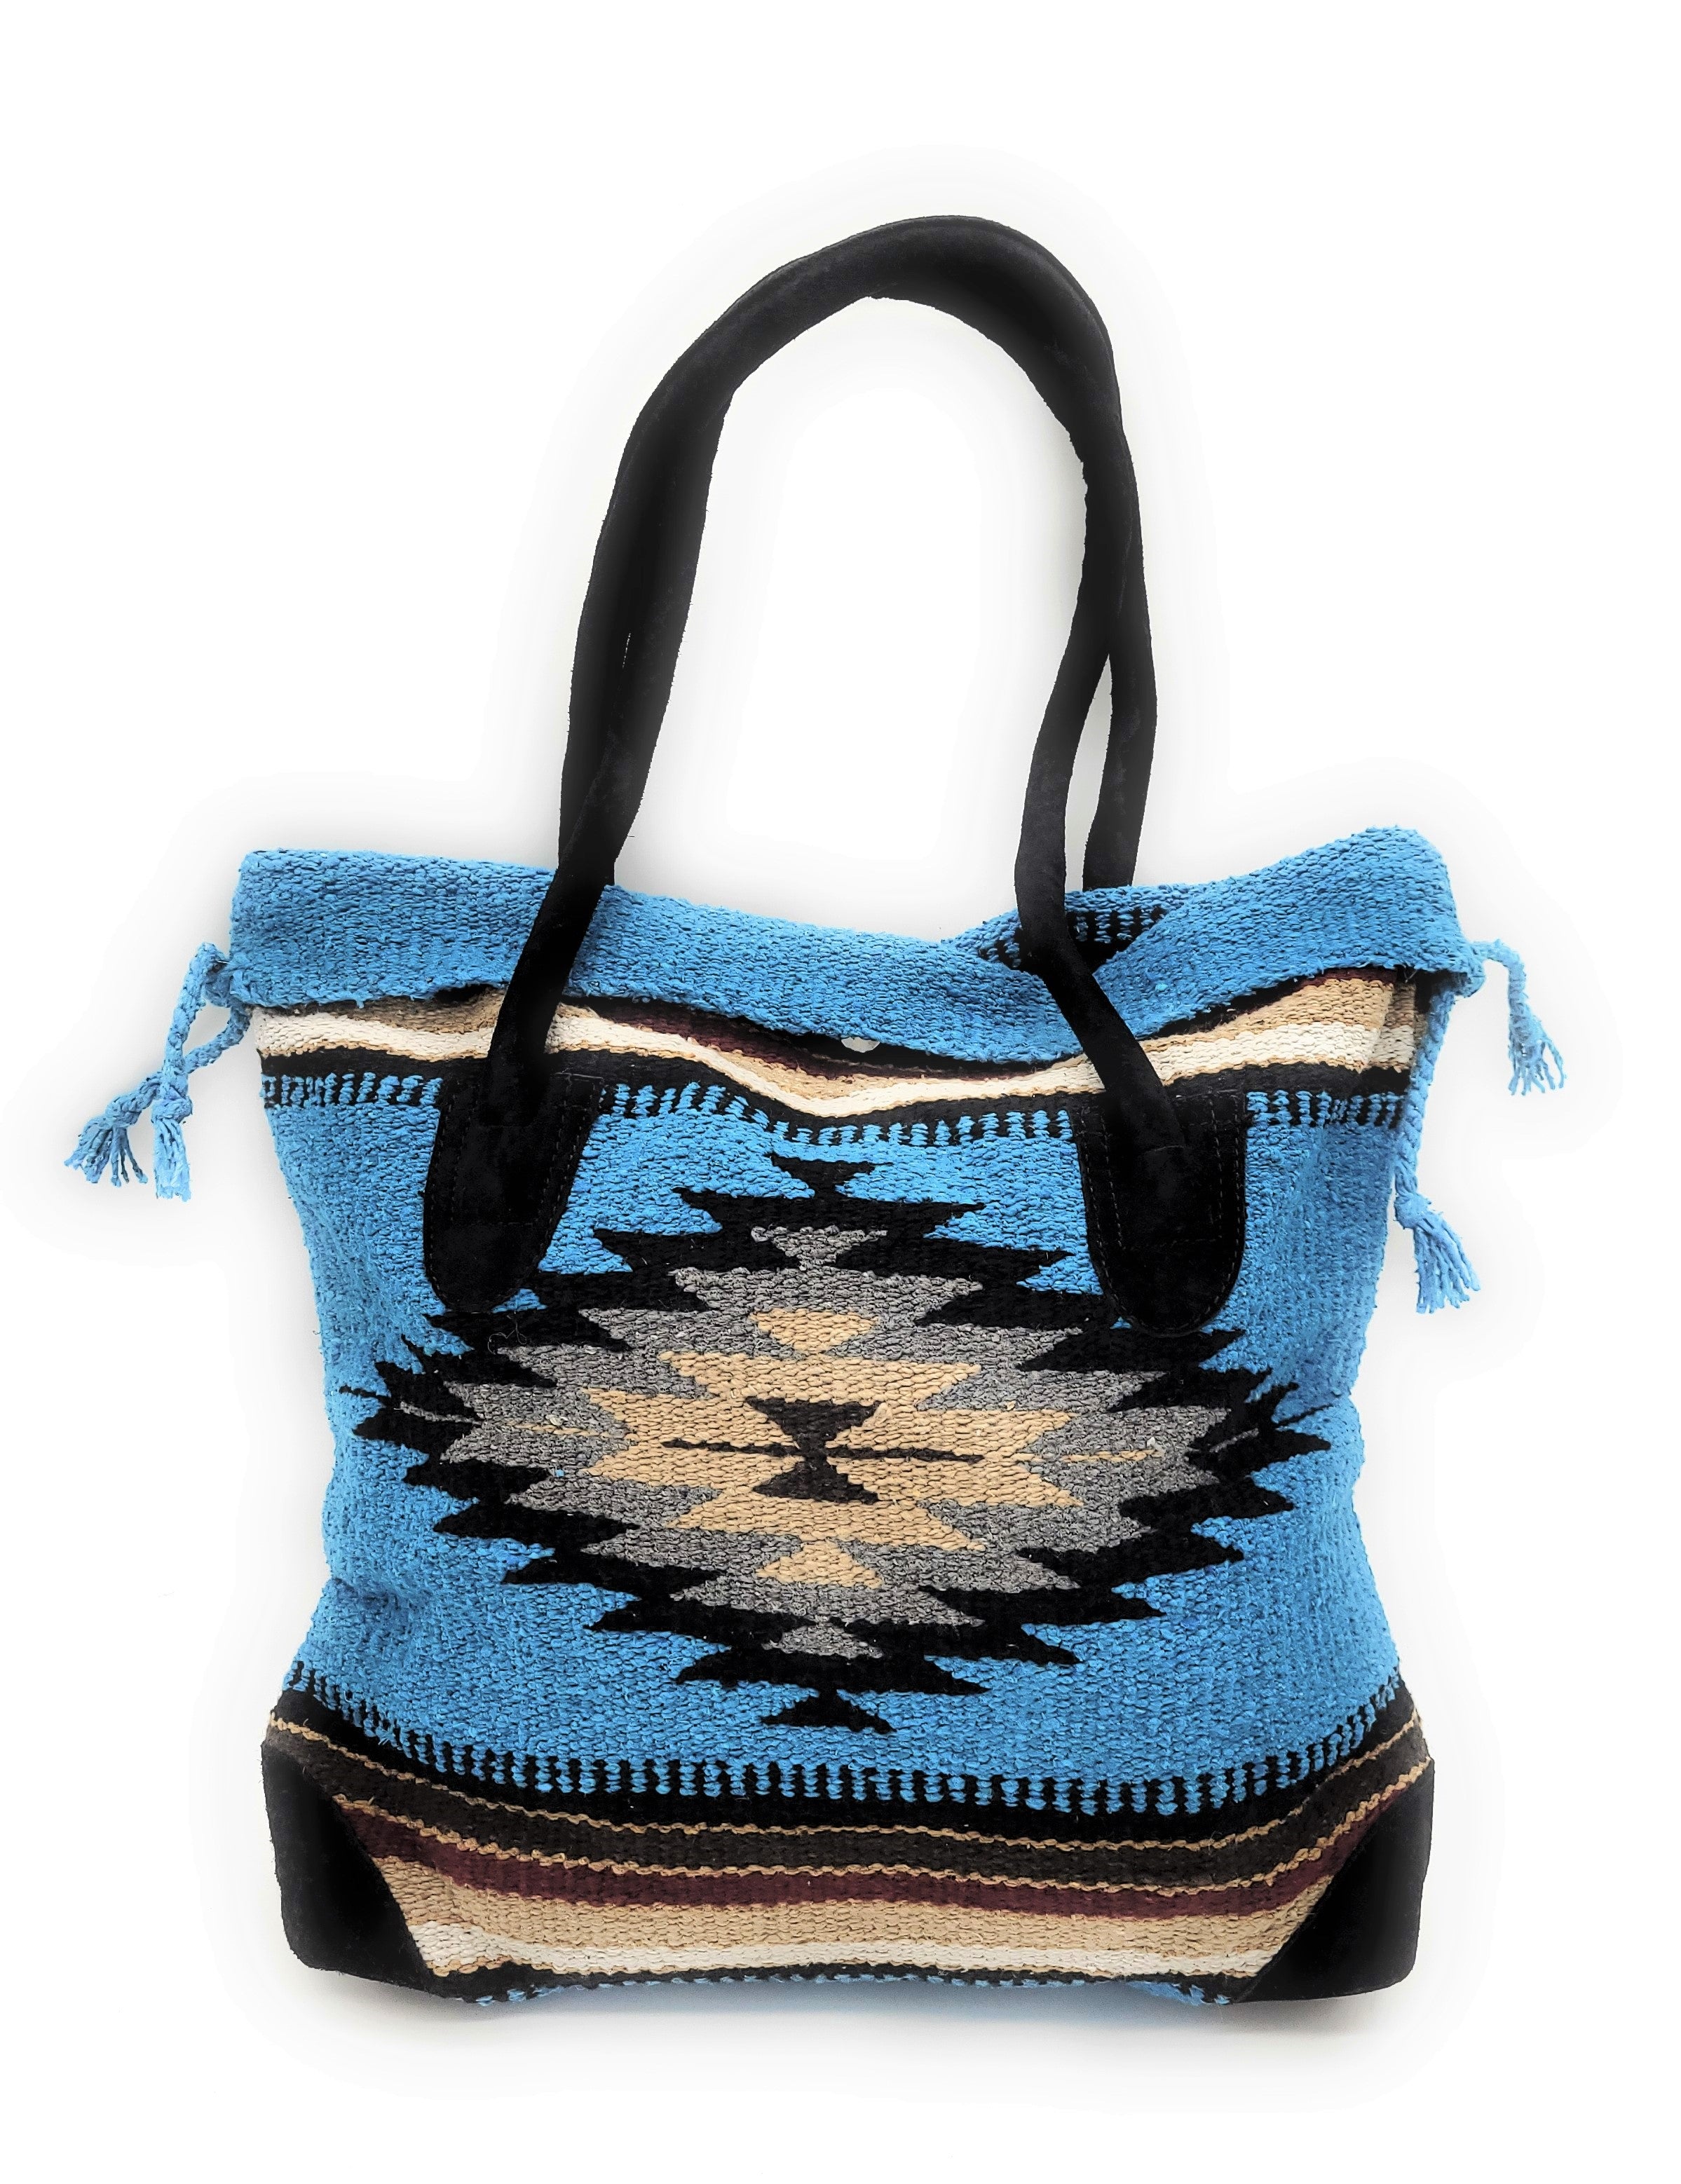 Southwestern Large Boho Tote- The Rio Go West Tote Purse - Ranch Junkie Mercantile LLC